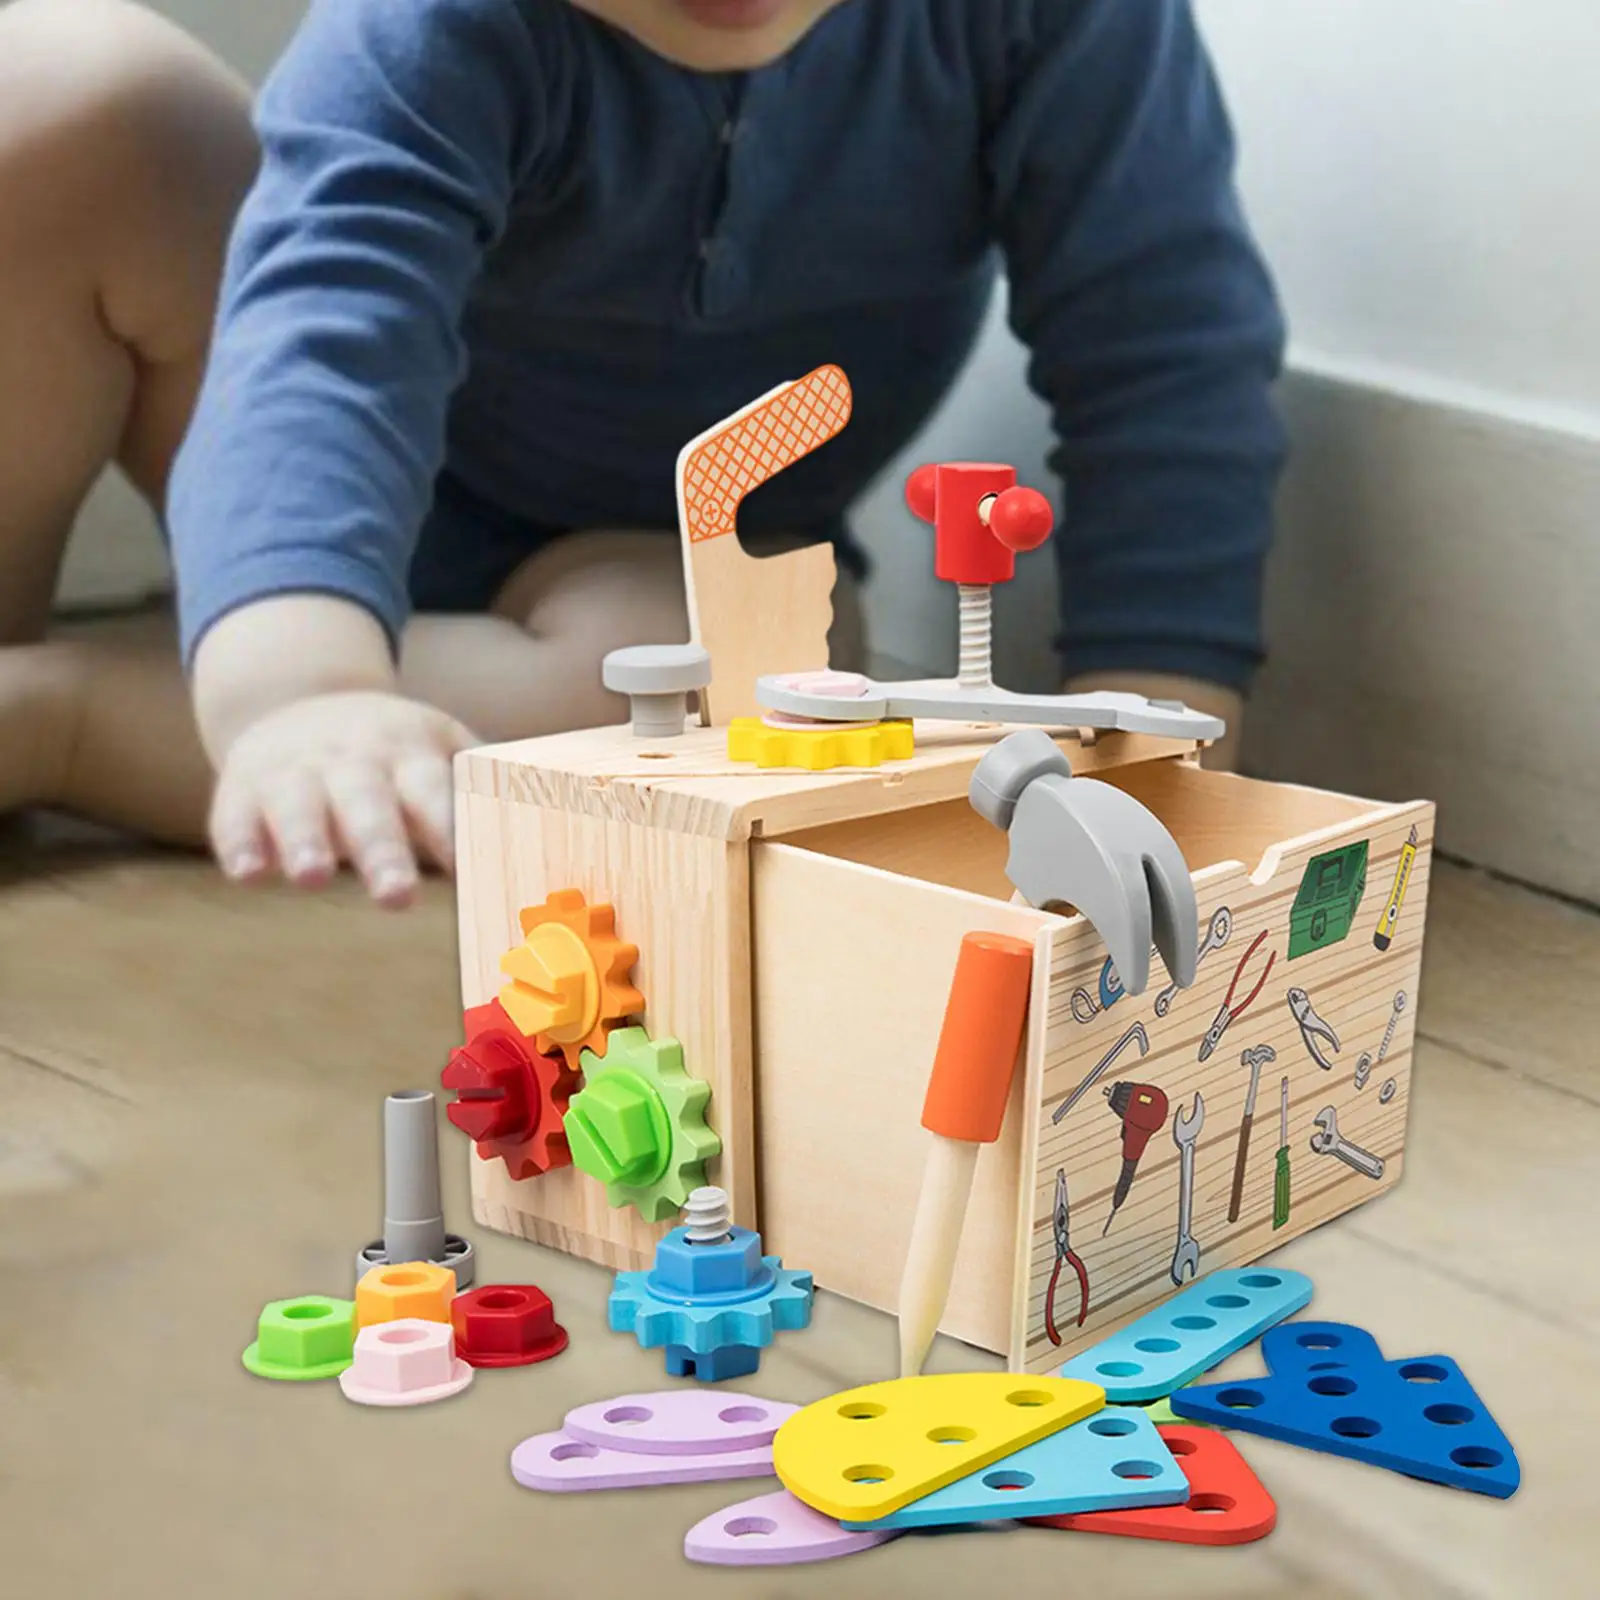 Wooden Toolbox Toy Develops Fine Motor Skills Pretend Play Construction Toy for Toddlers Girls Boys Christmas Holiday Ages 3+